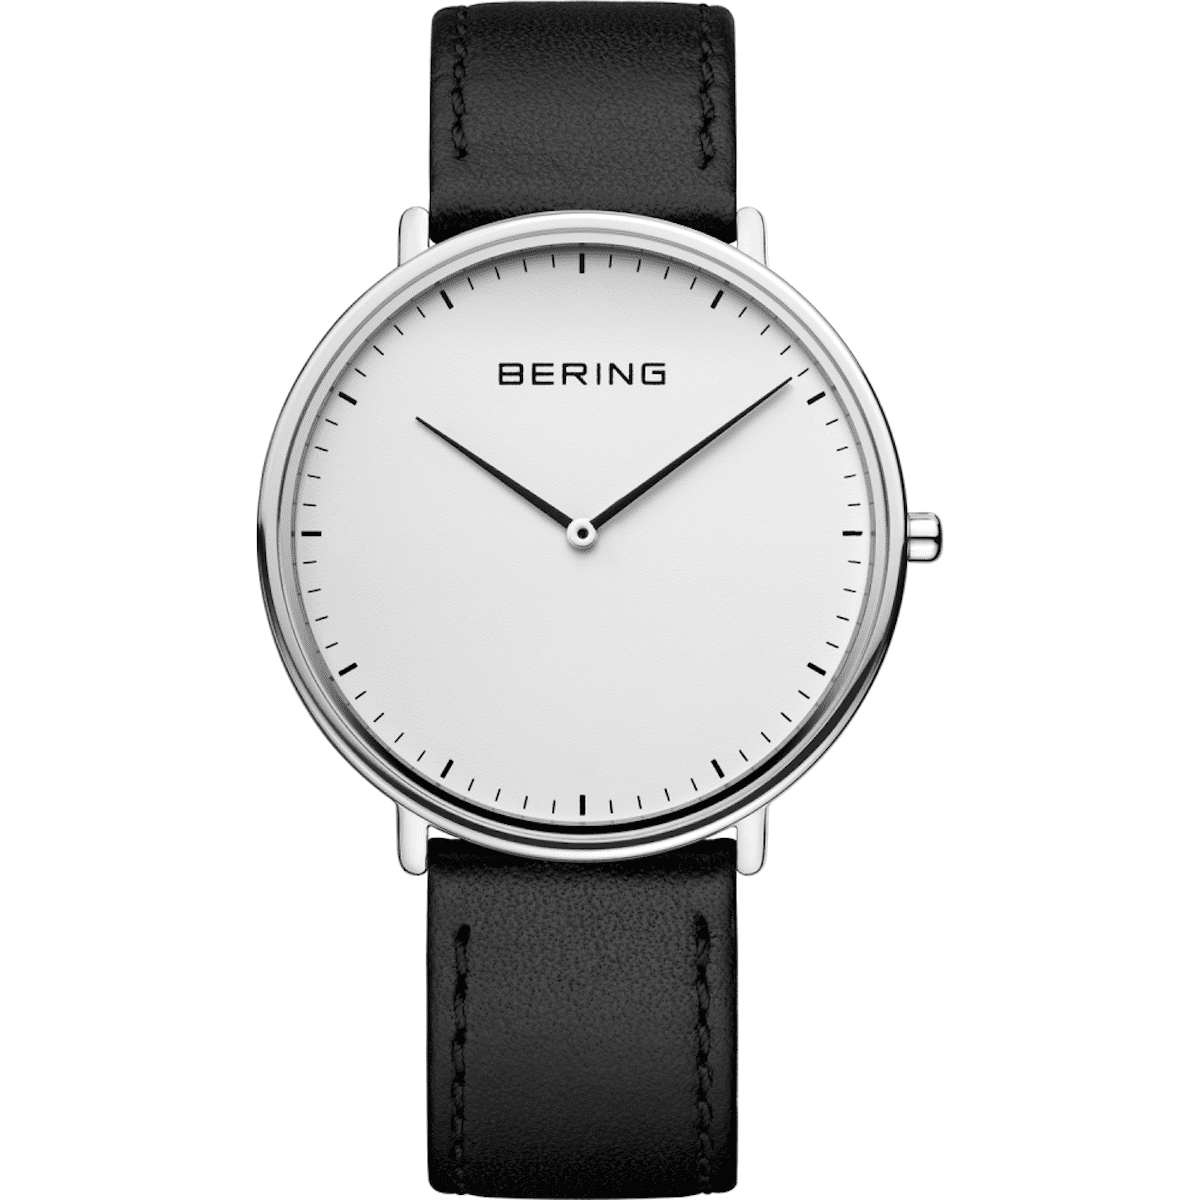 White face watch with black leather strap. Men's Christmas party wear